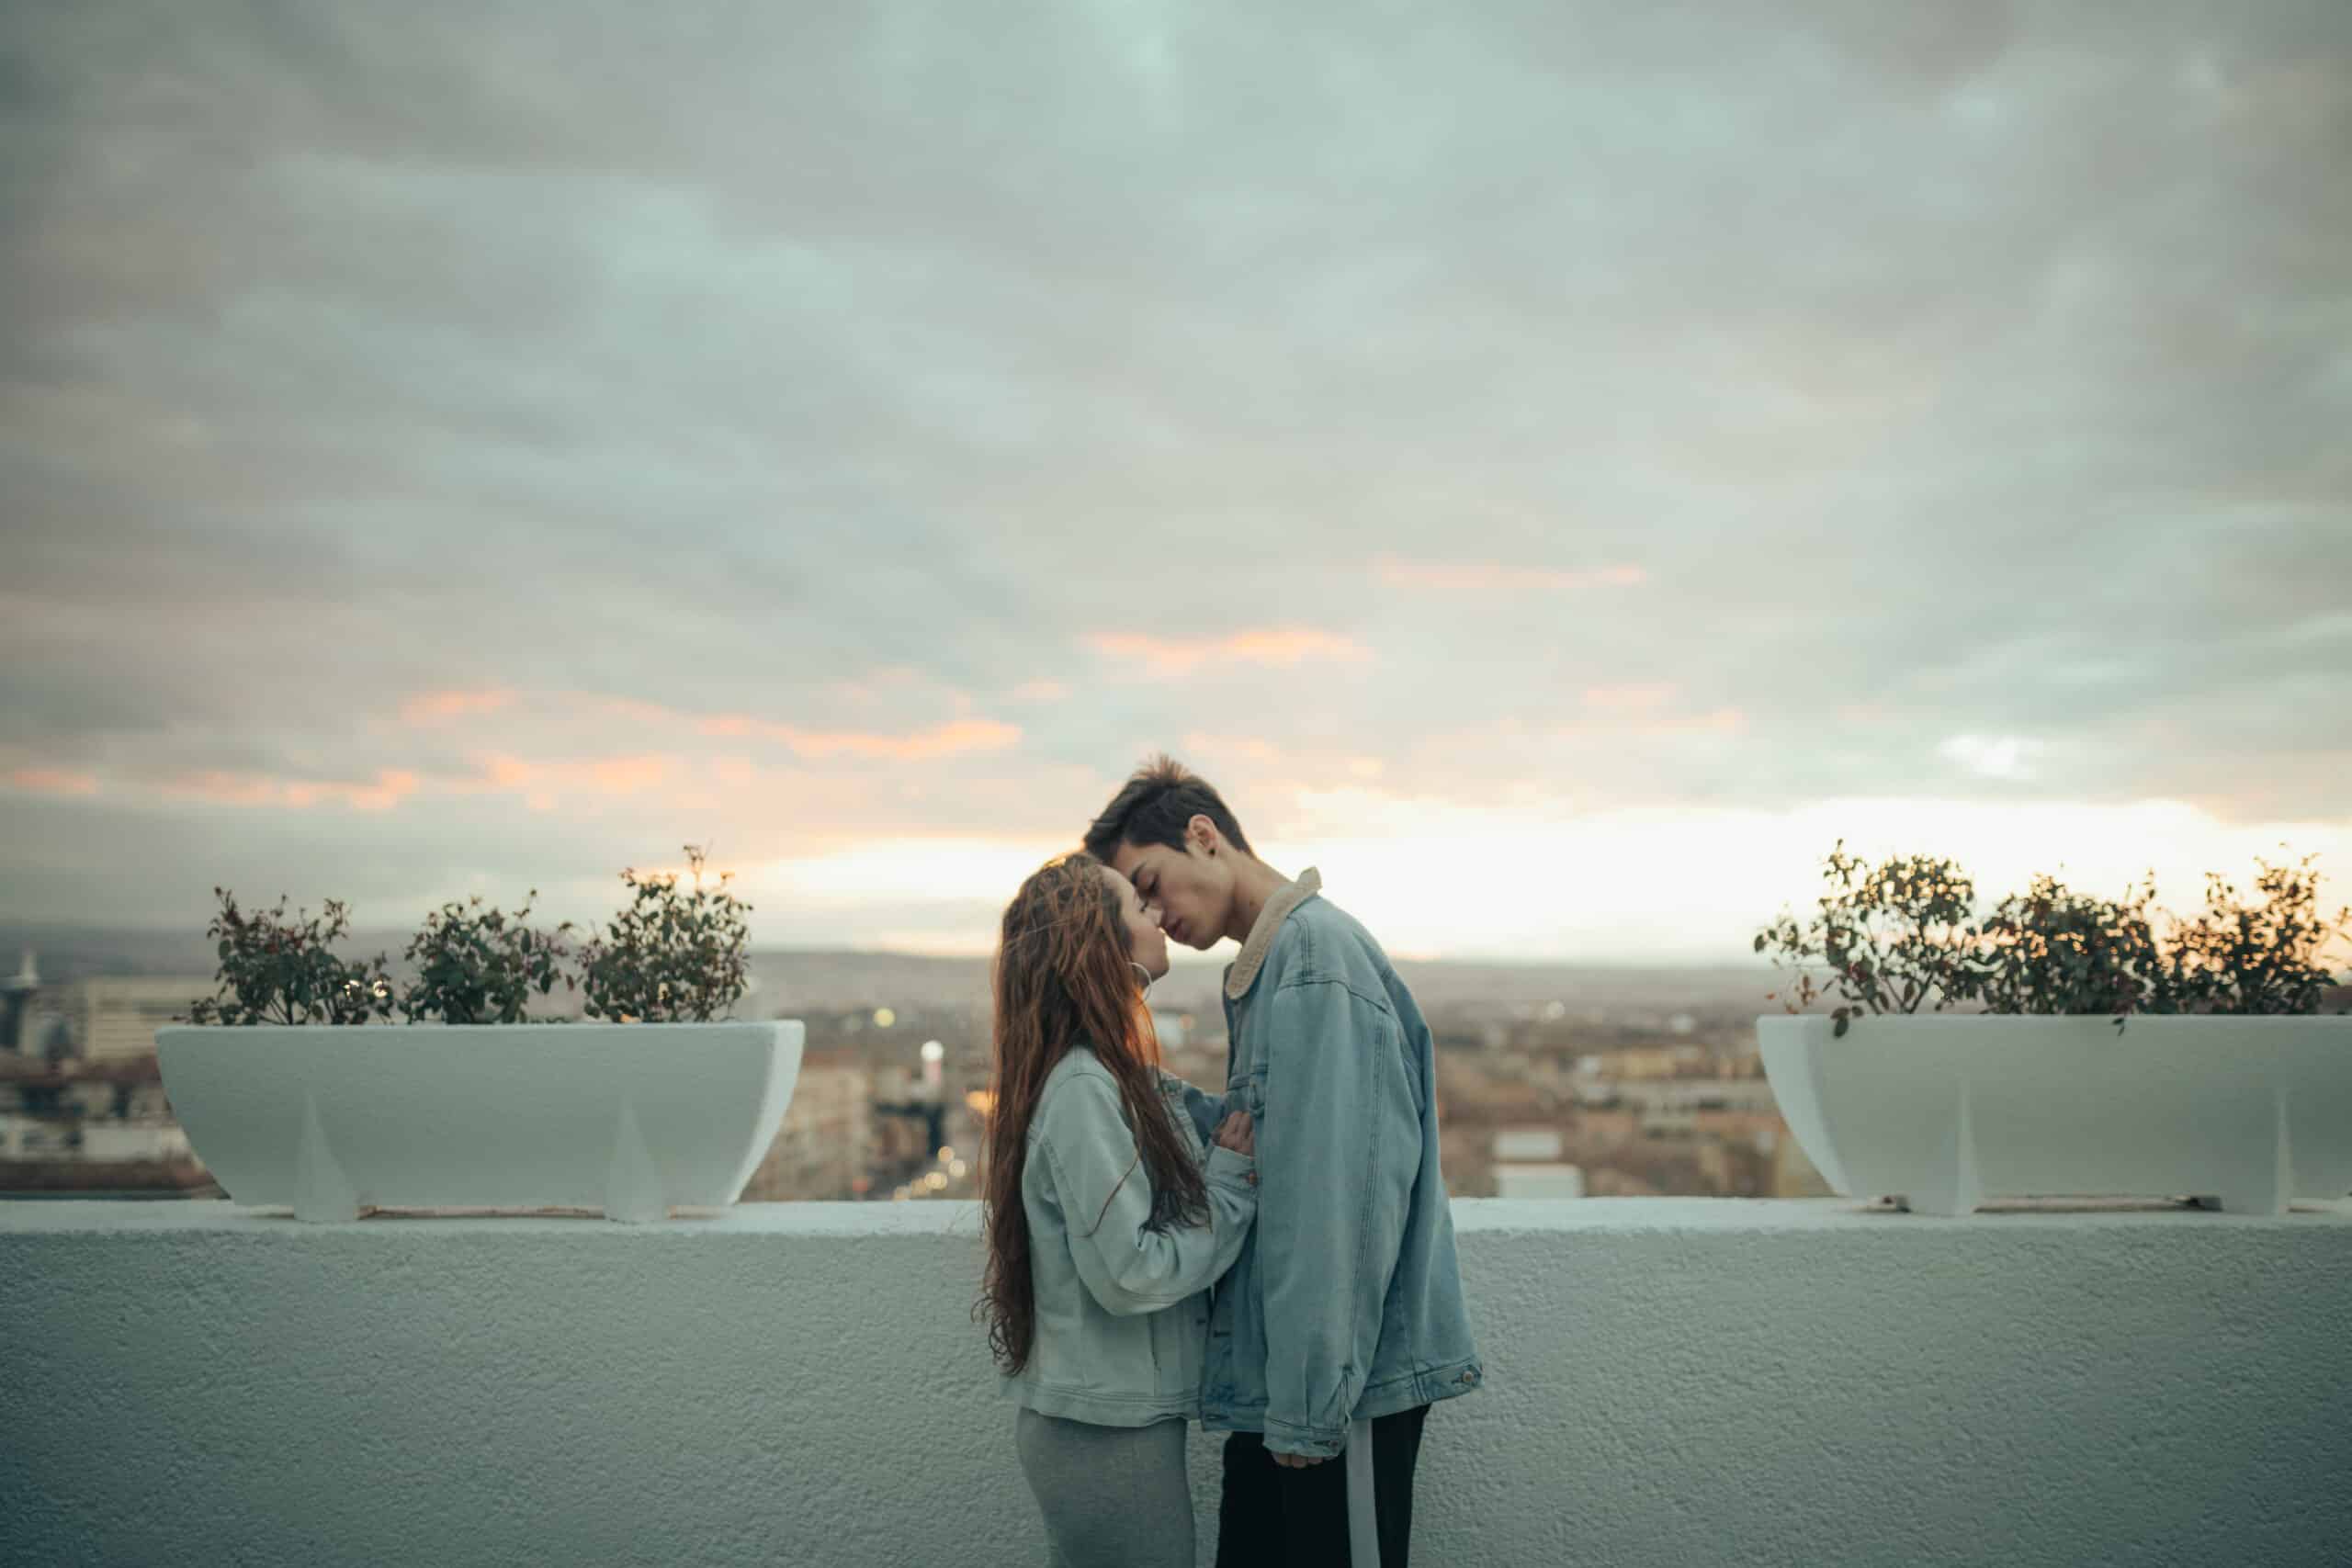 Young lovers kissing in a beautiful sunset